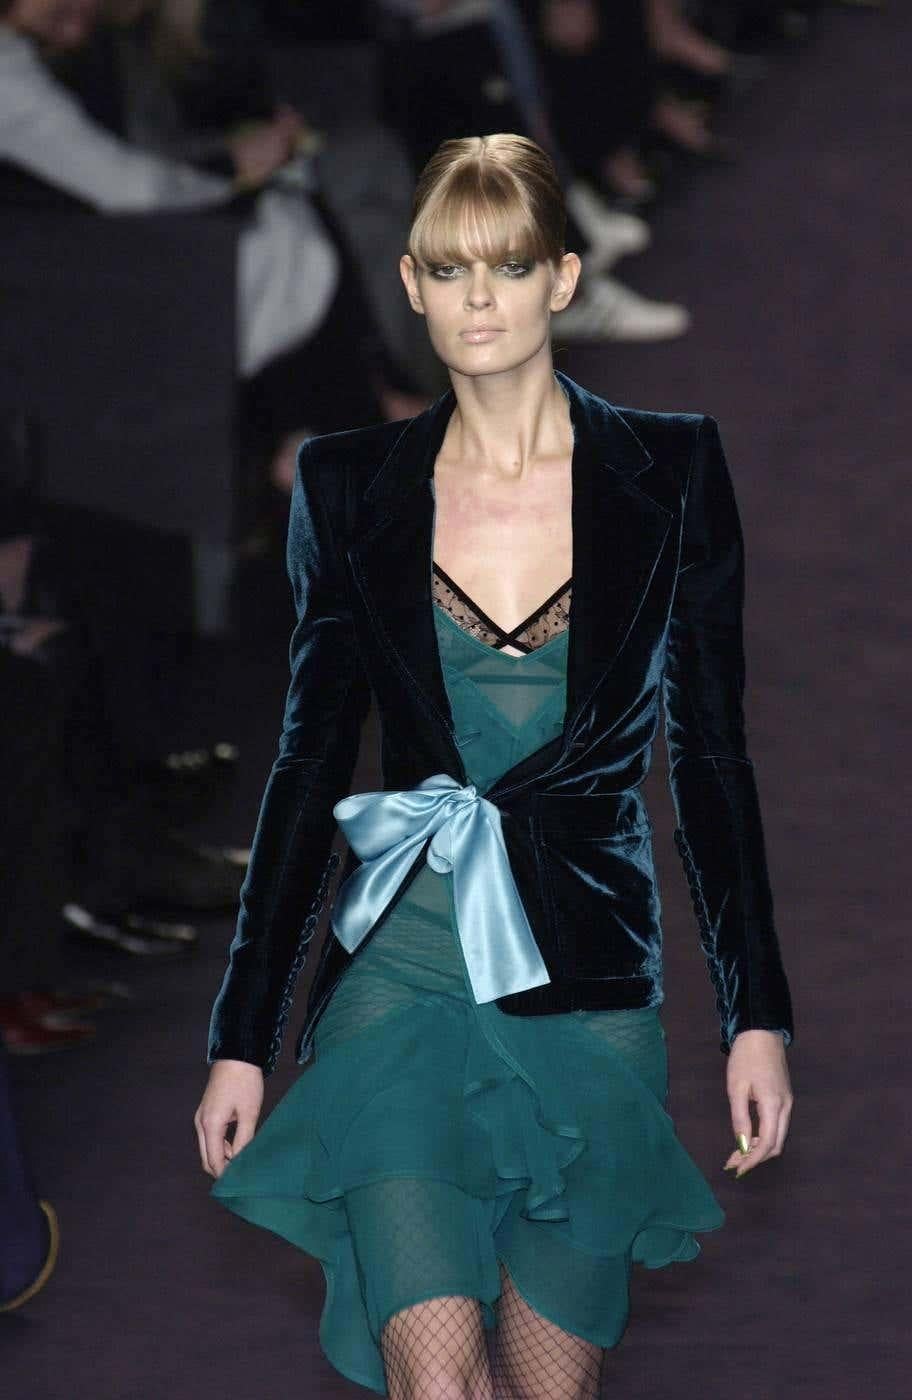 Presenting an iconic emerald green Yves Saint Laurent Rive Gauche silk dress, designed by Tom Ford. From the Fall/Winter 2003 collection, a more sheer version of this dress debuted on the season's runway as look 1 modeled by Julia Stegner and in the